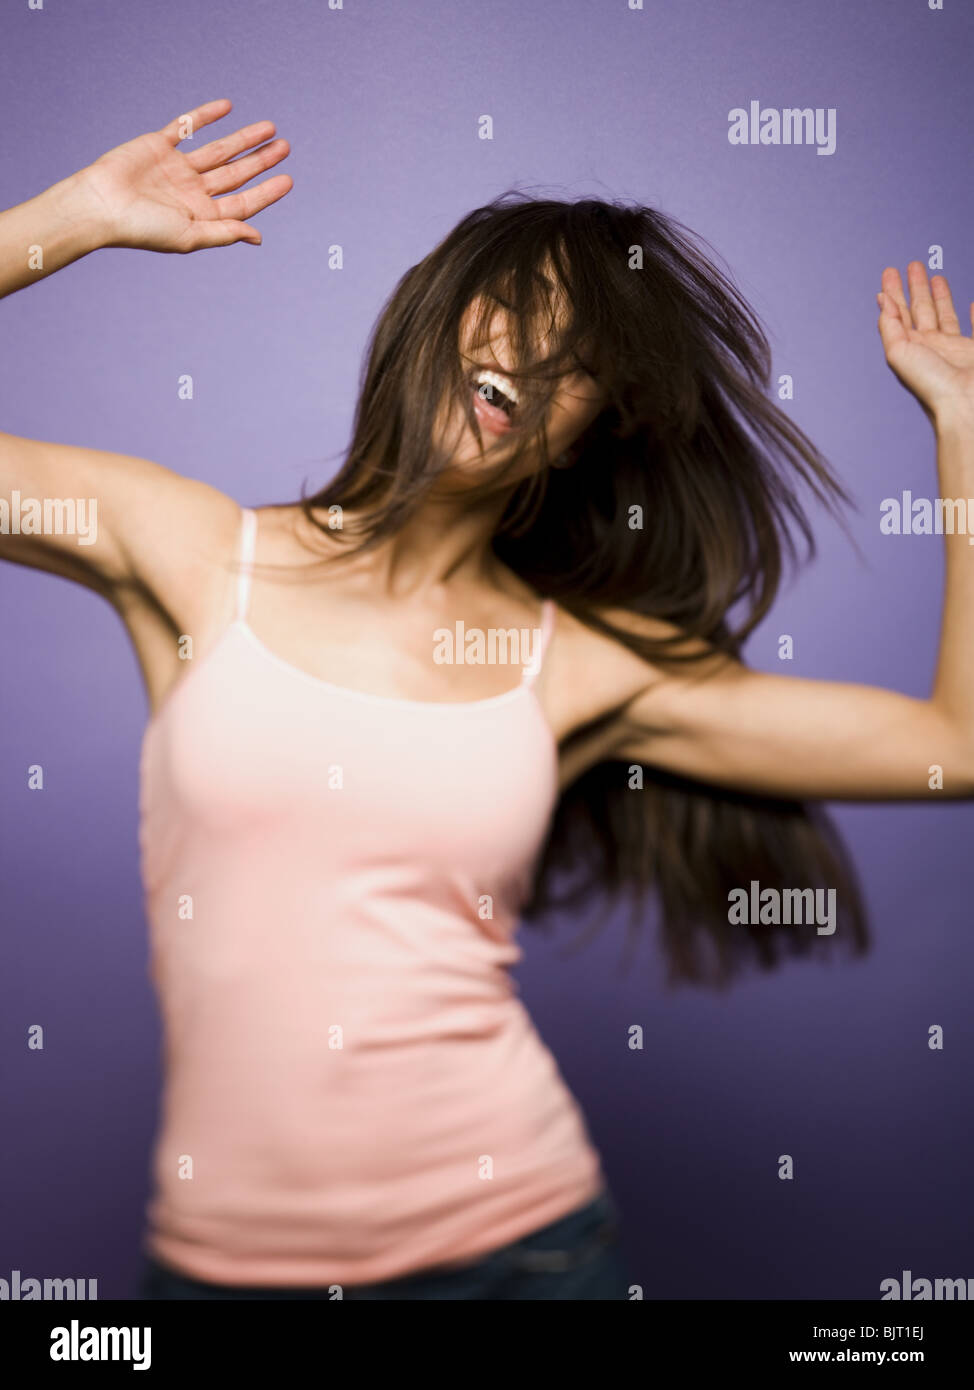 Woman flexing her biceps Stock Photo